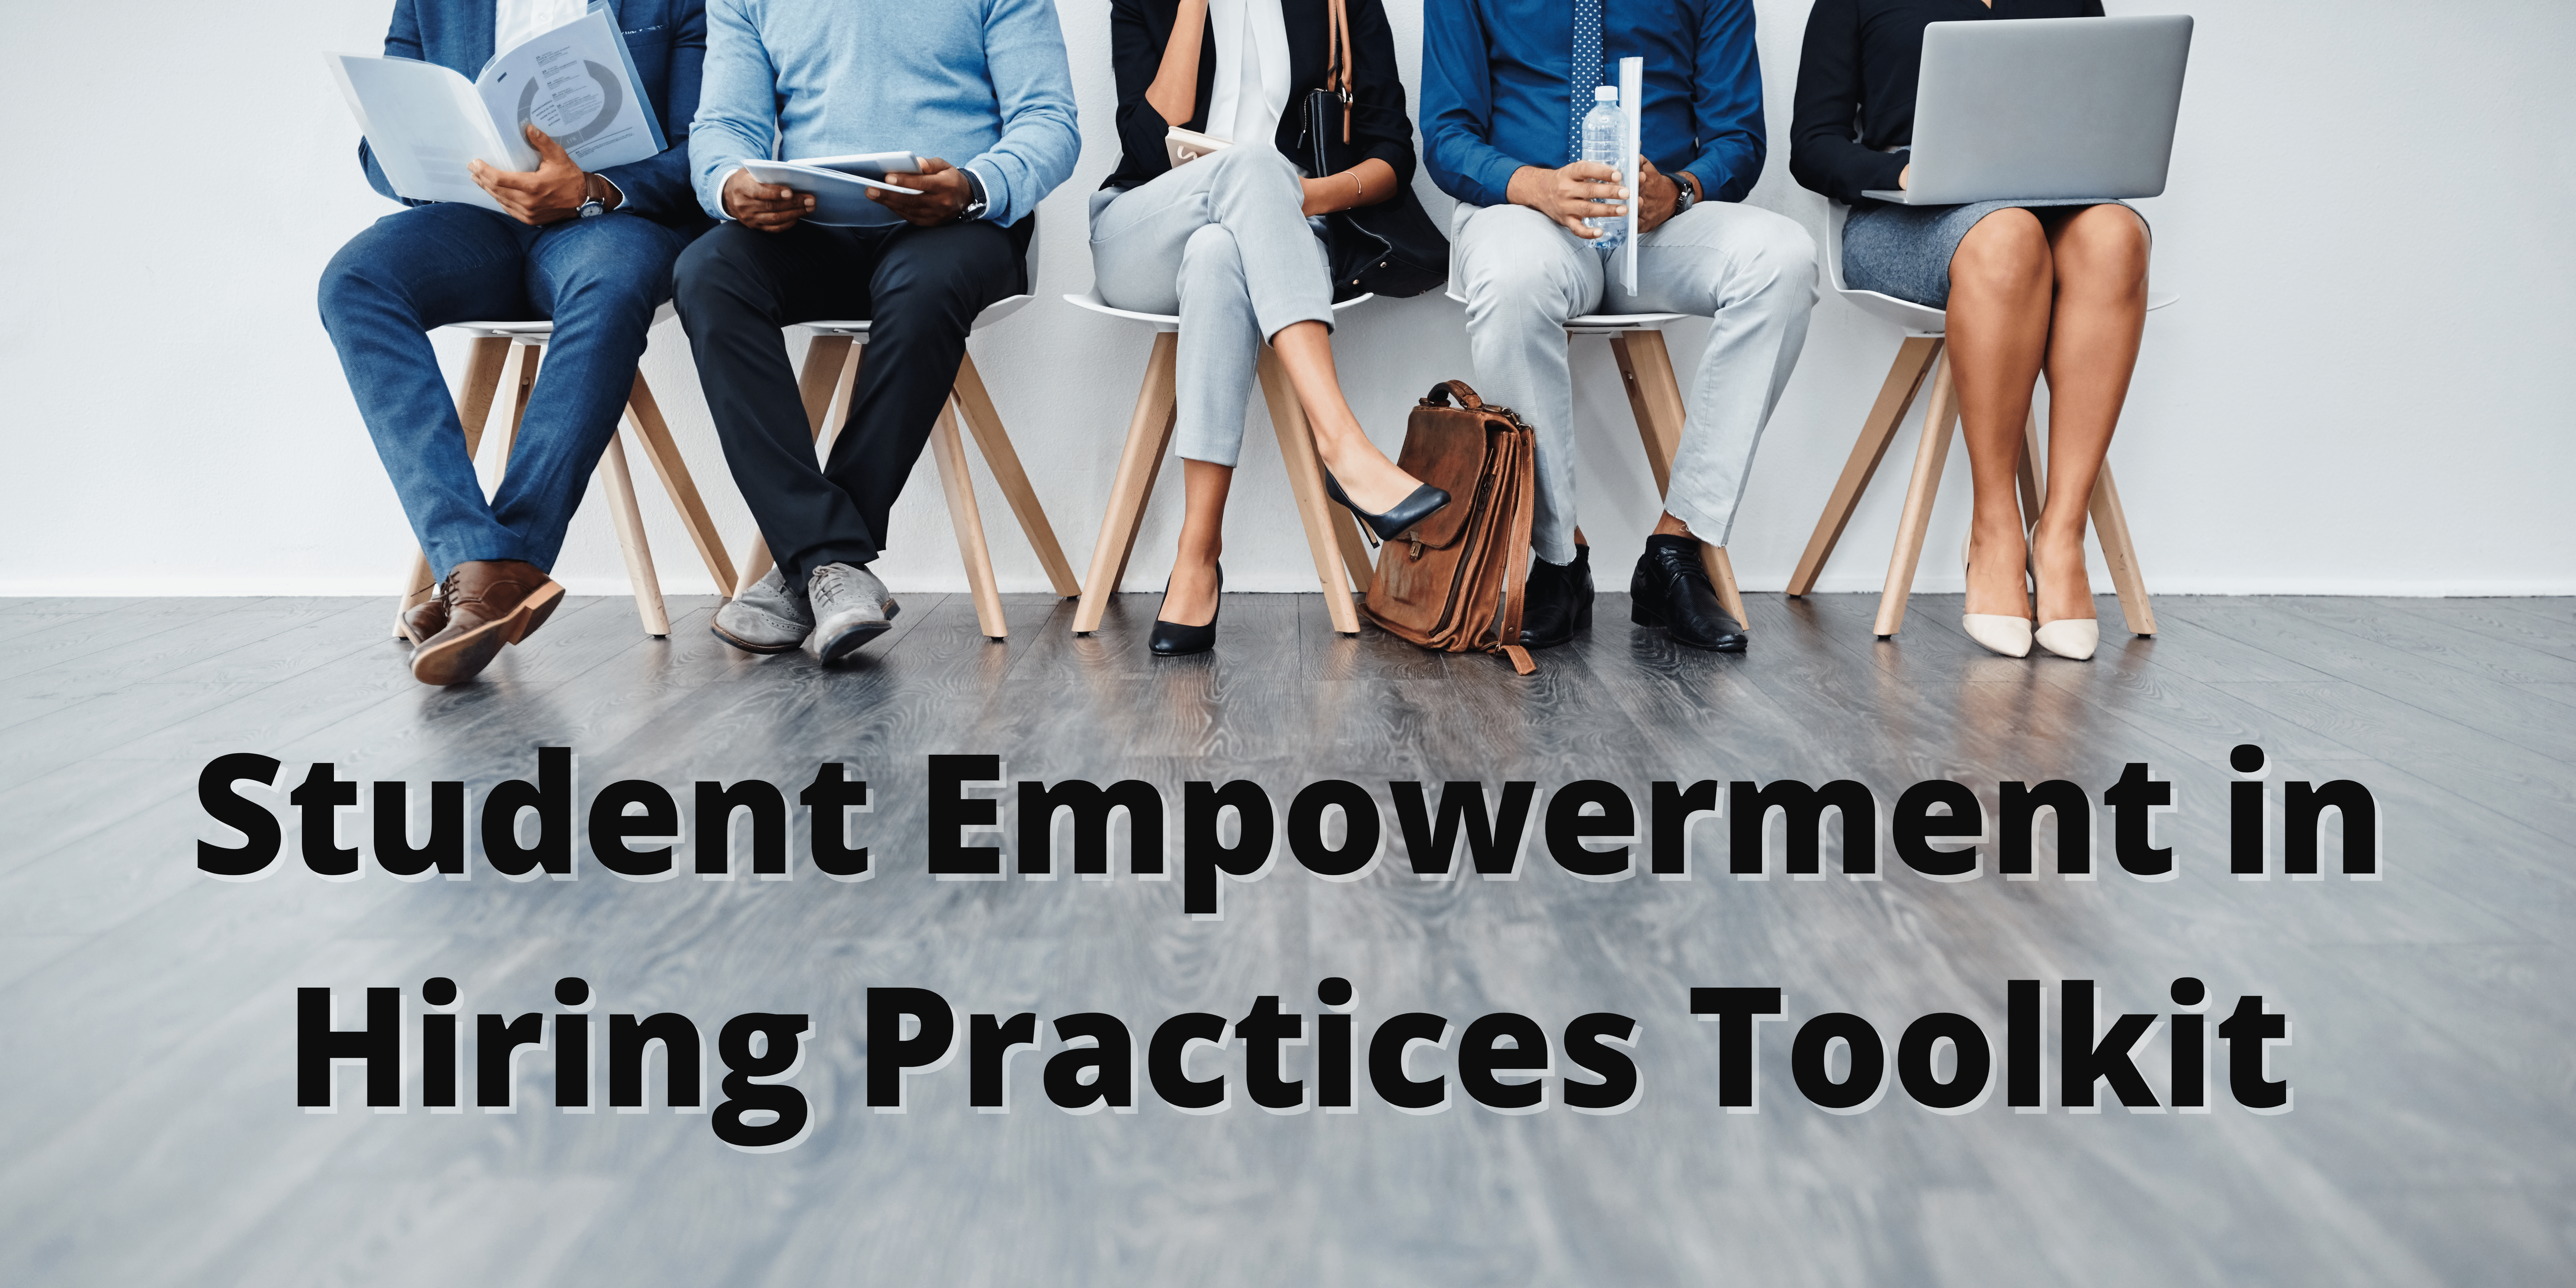 Student Empowerment in Hiring Practices Toolkit